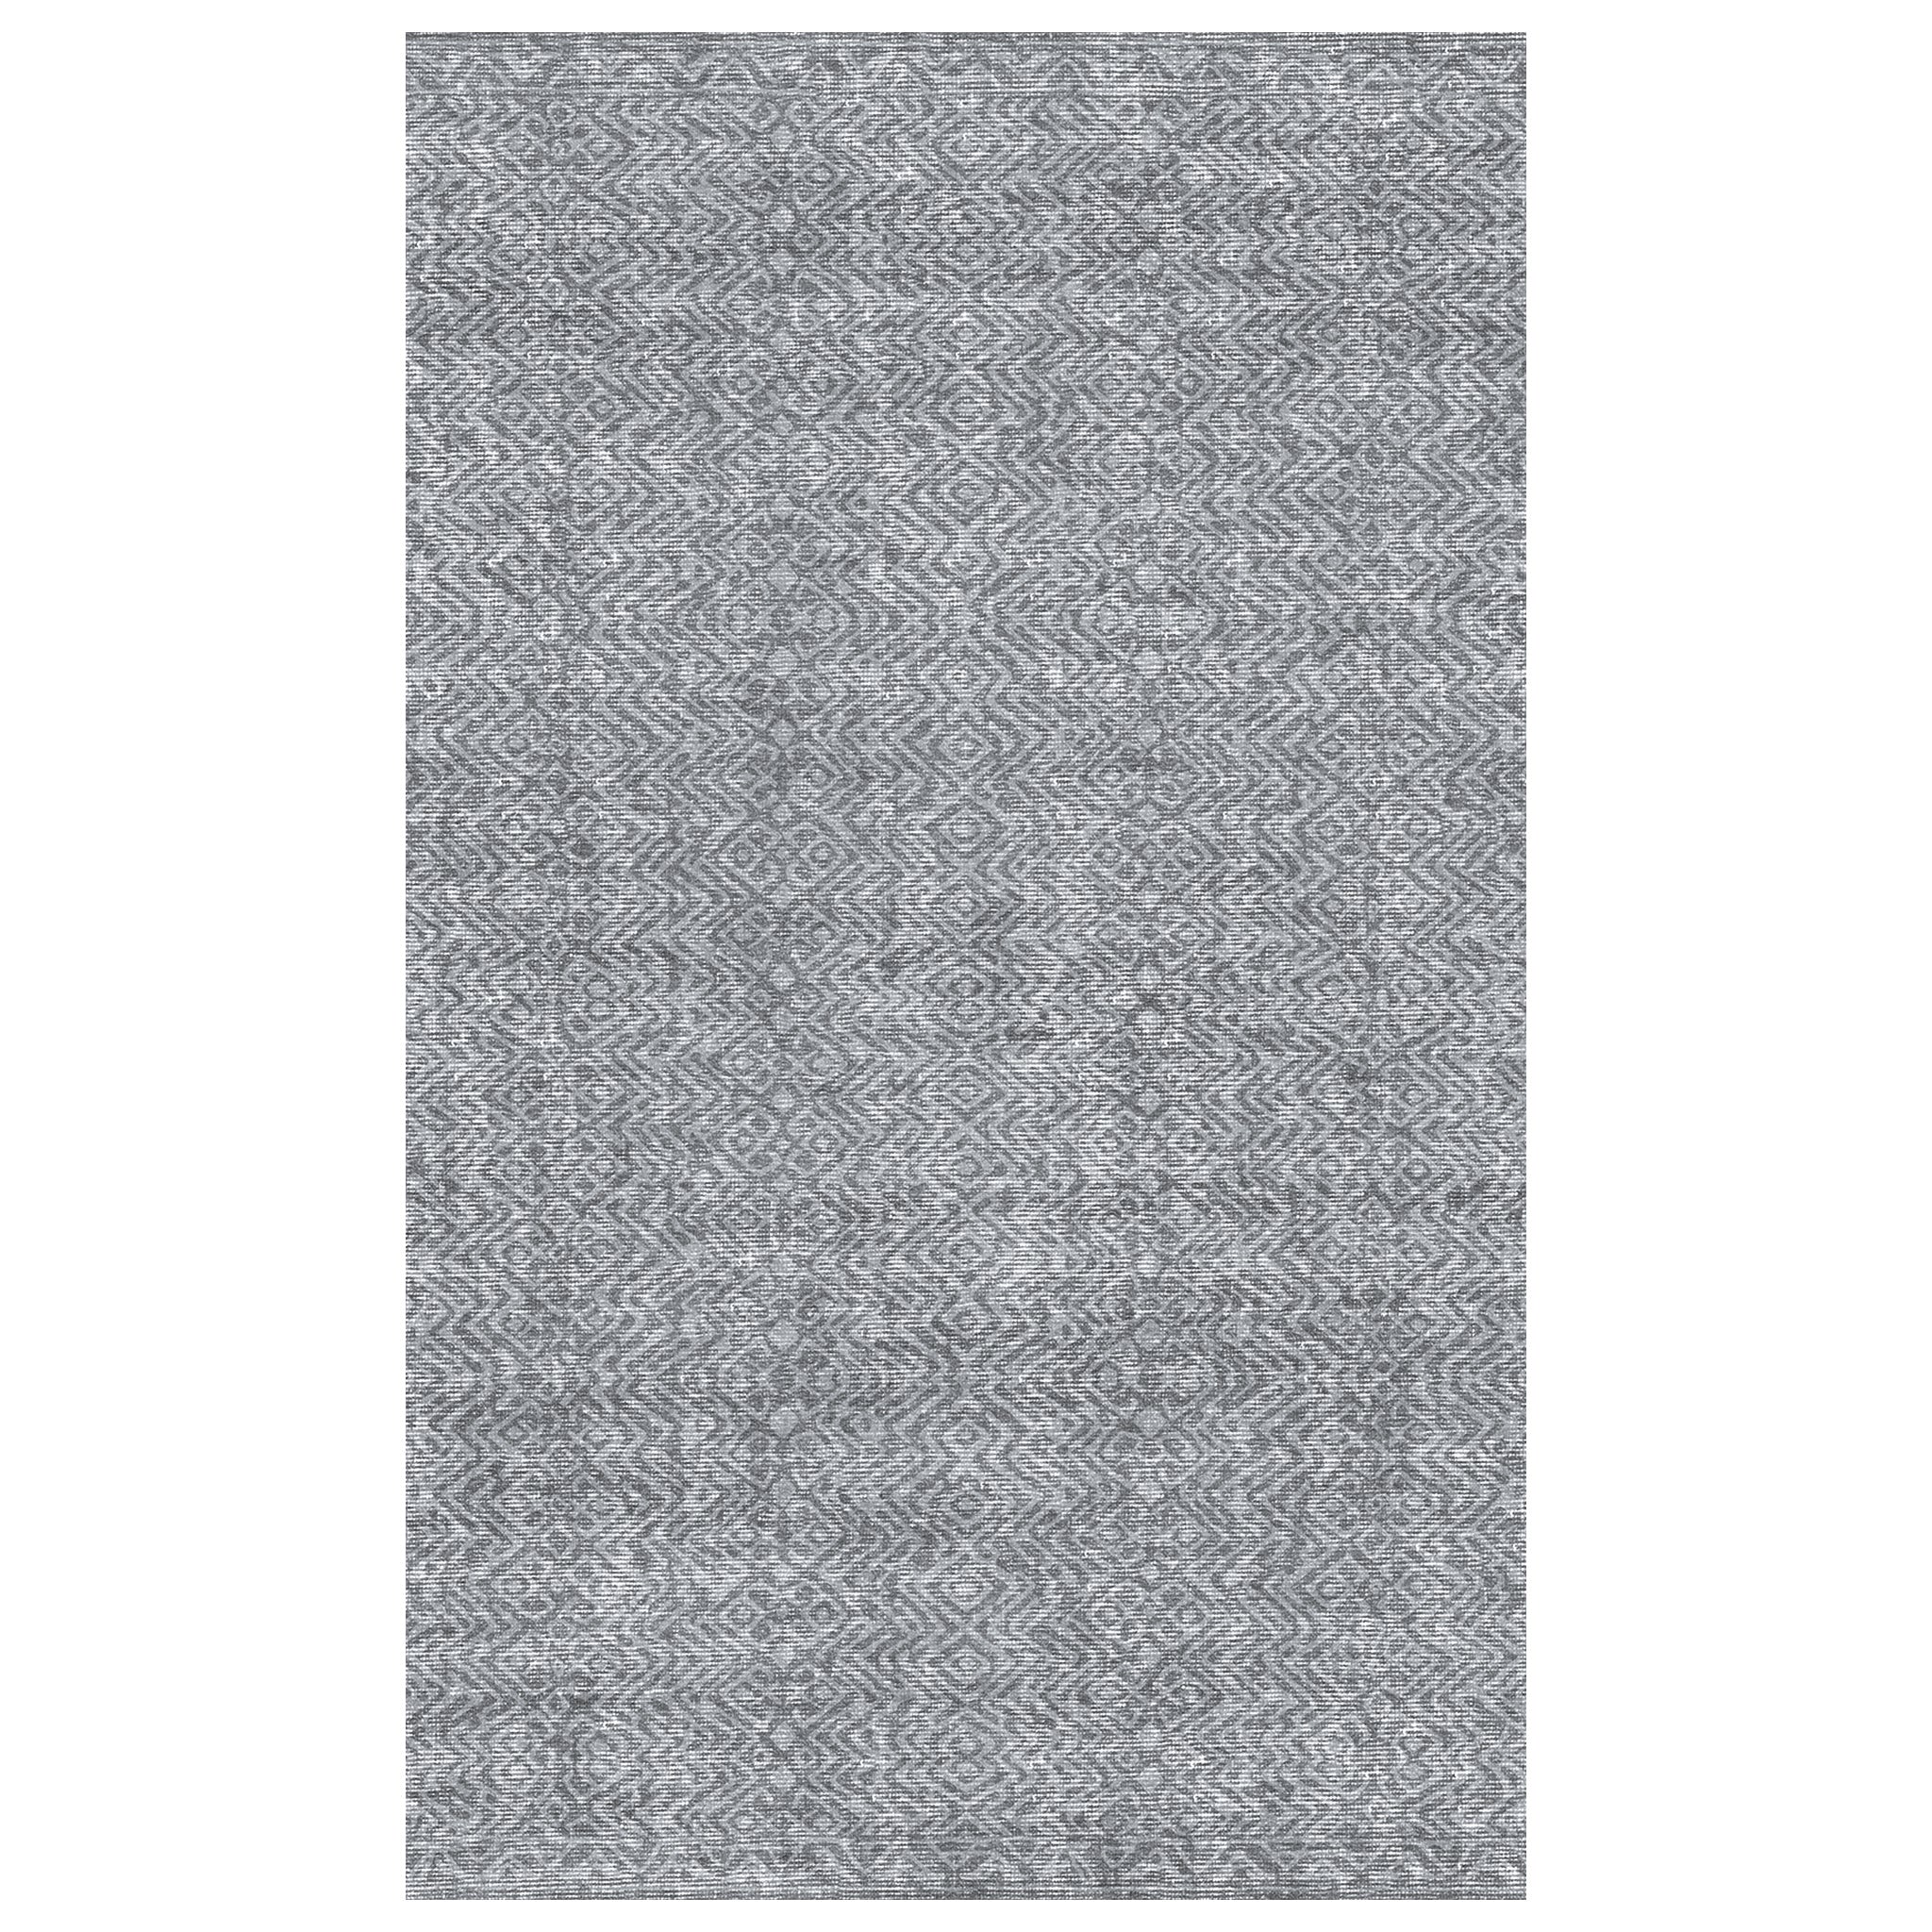 Vienne Wool Striped White and Blue Area Rug 6'x9' + Reviews